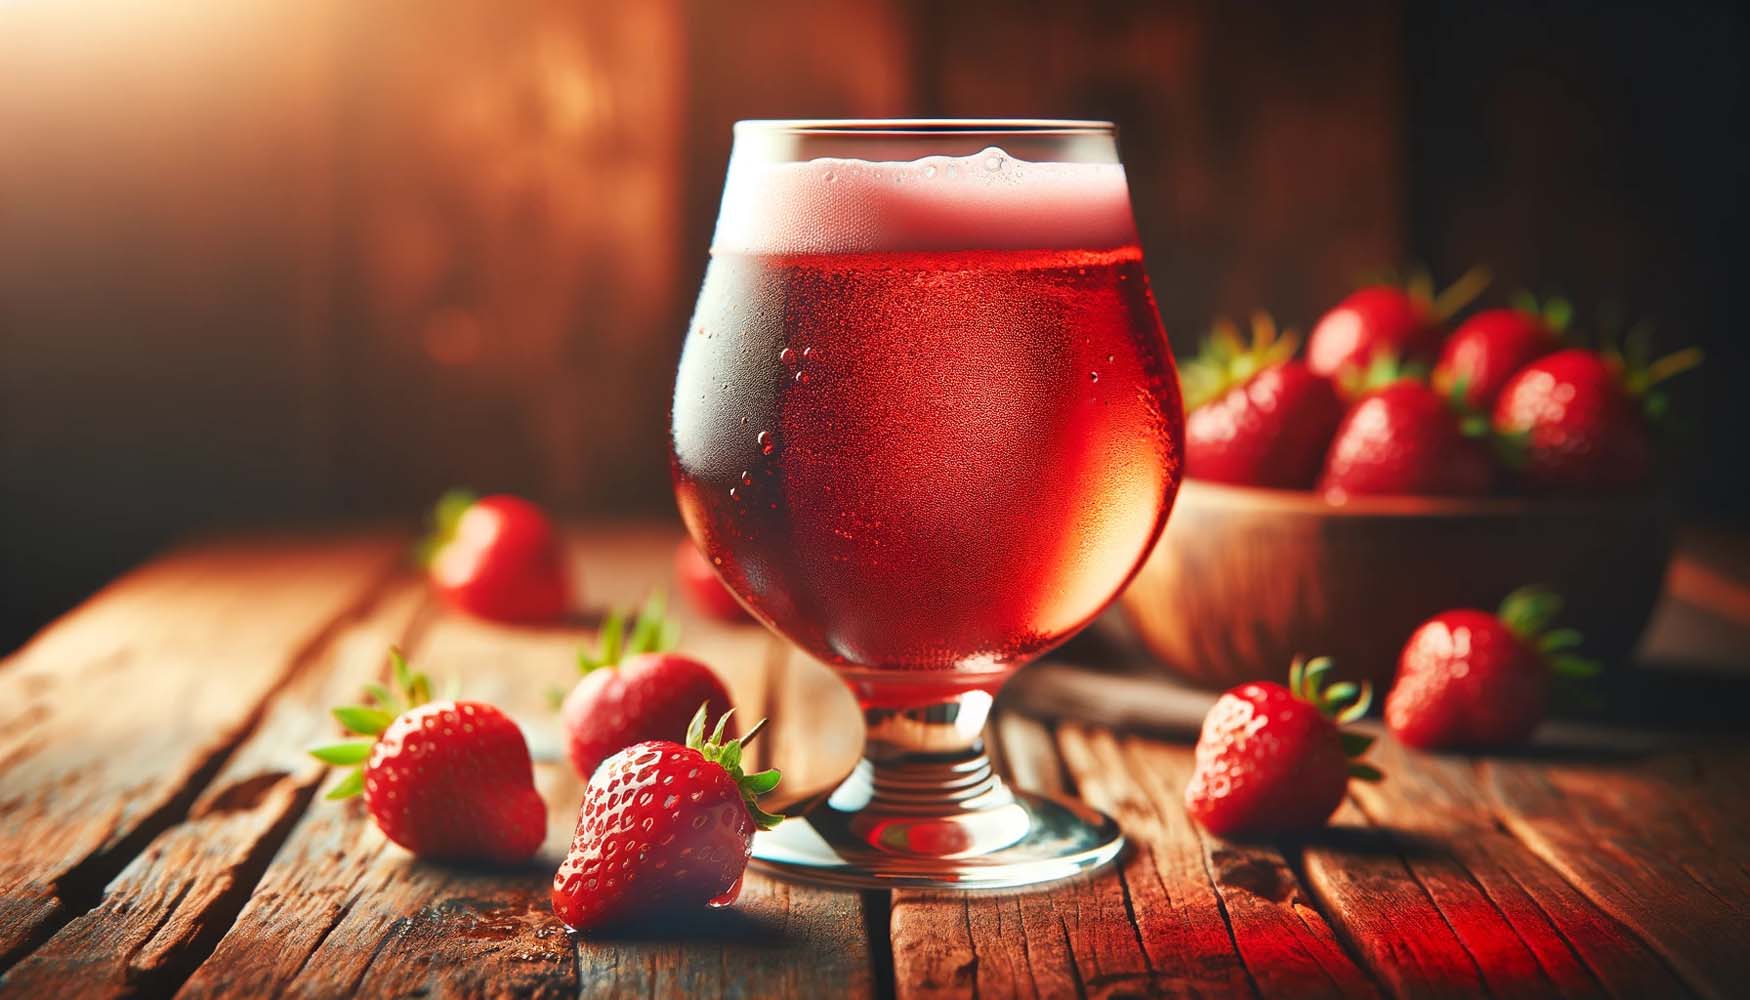 Wicked Neat Strawberry Blonde Ale Recipe and Review